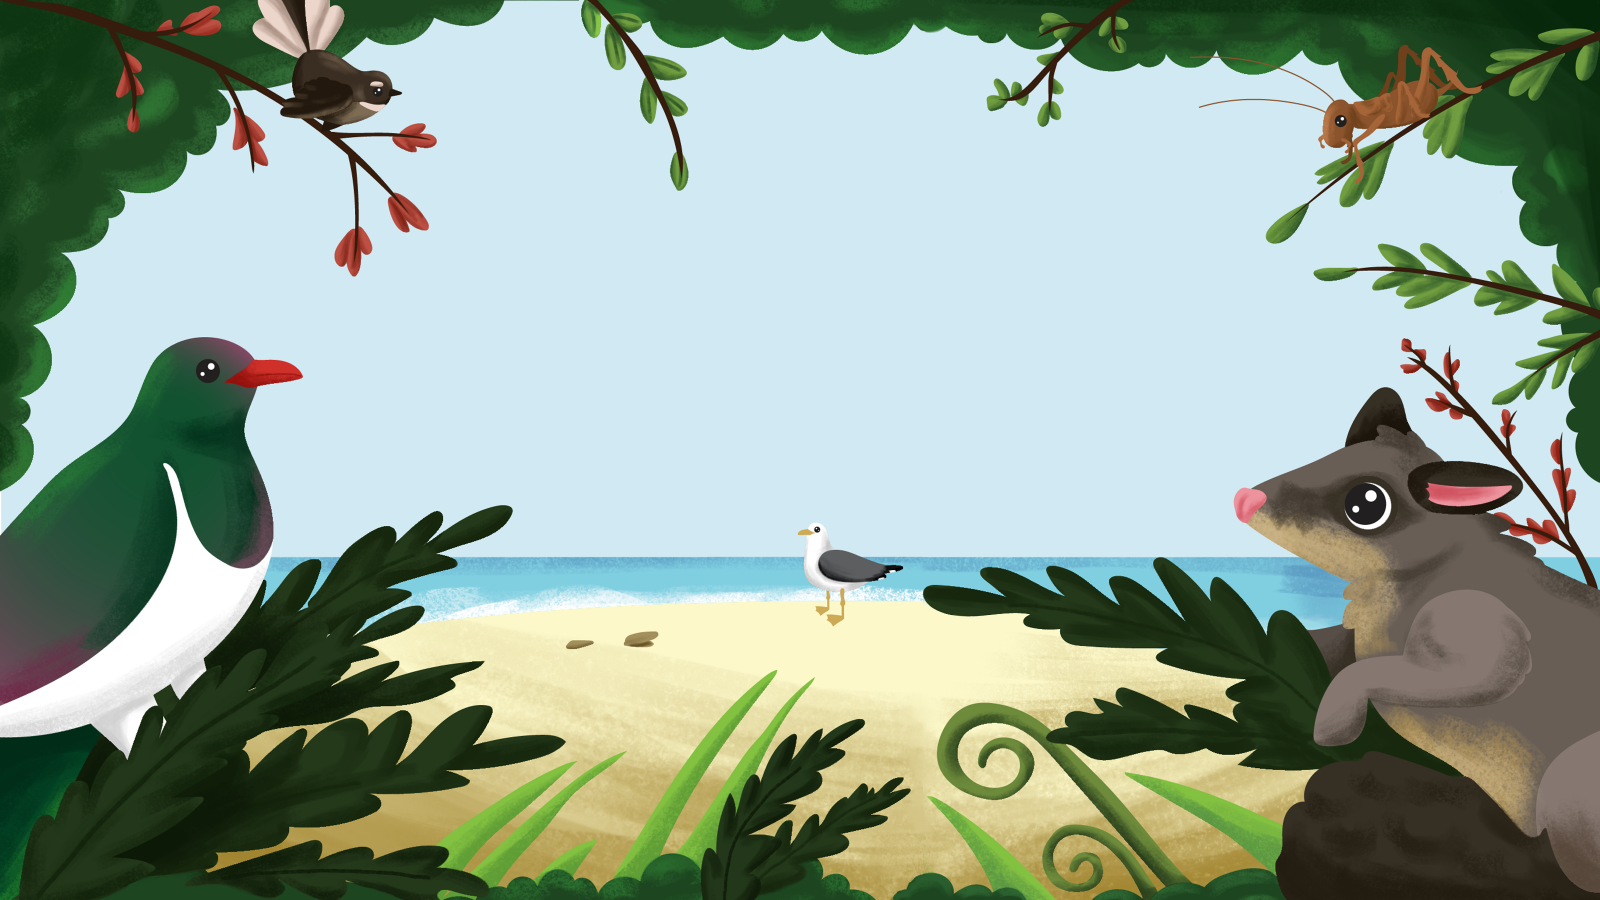 graphic image with kereru on one side, rat on another, plus other native animals on branches framing a beach scene